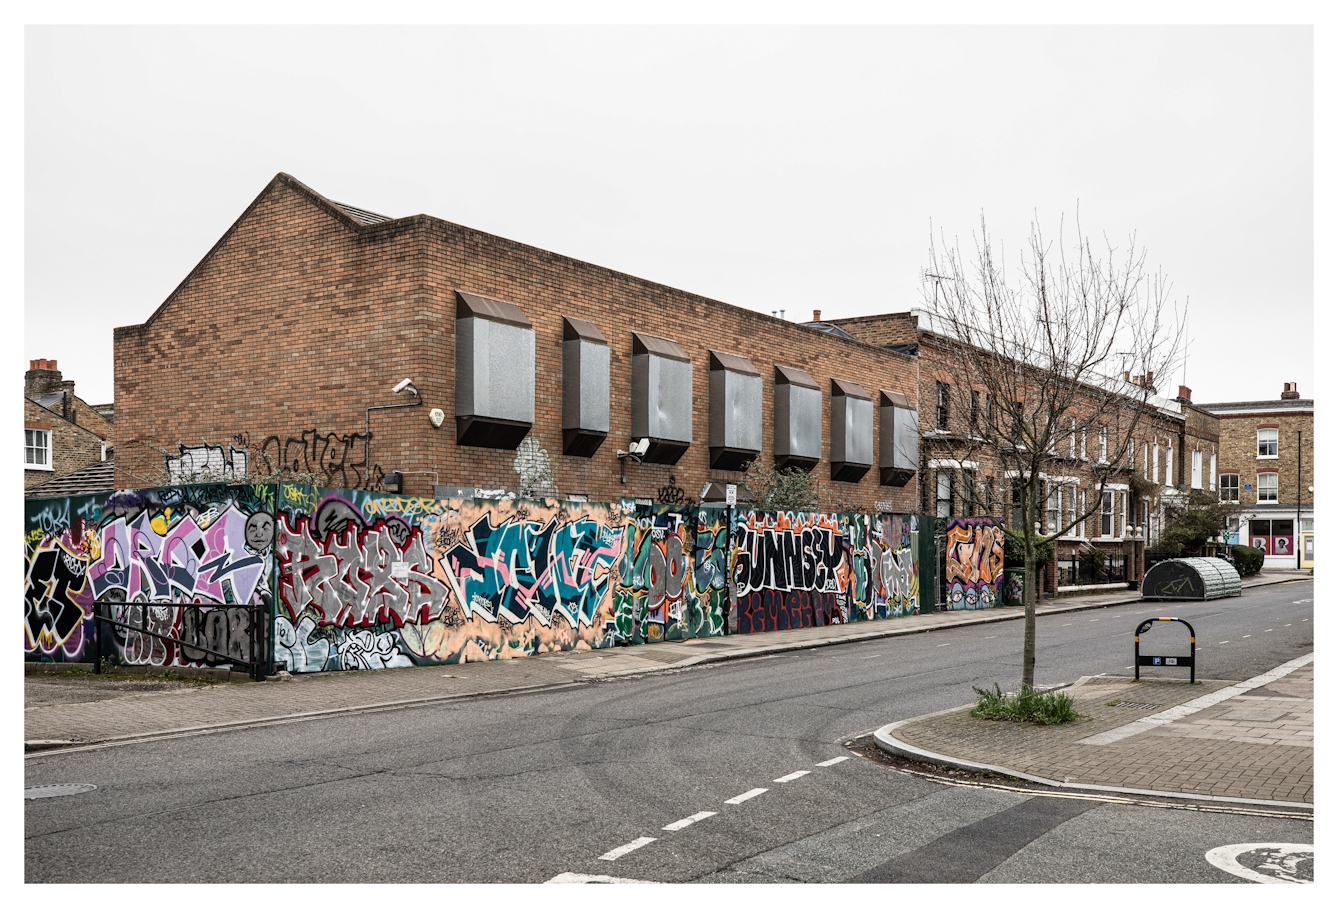 Photograph of a South London street scene in Brixton, showing a building which has all its windows boarded up with metal shutters. The building is surrounded by wooden hoarding which is covered in colourful graffiti.